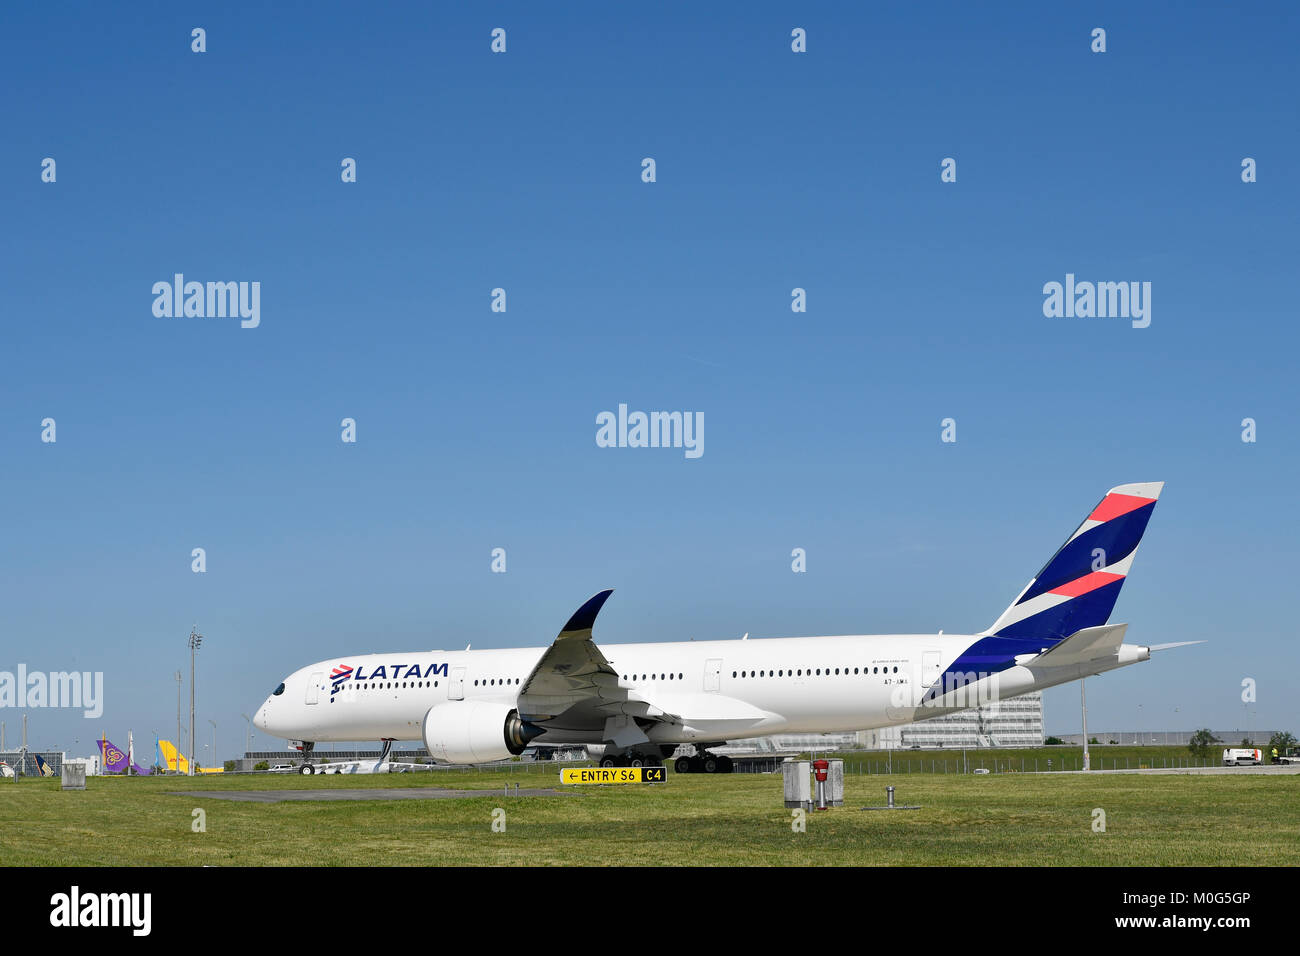 Latam, Airbus, A350, 900, roll out, take of, start, Runway South, aircraft, plane, Munich airport Stock Photo